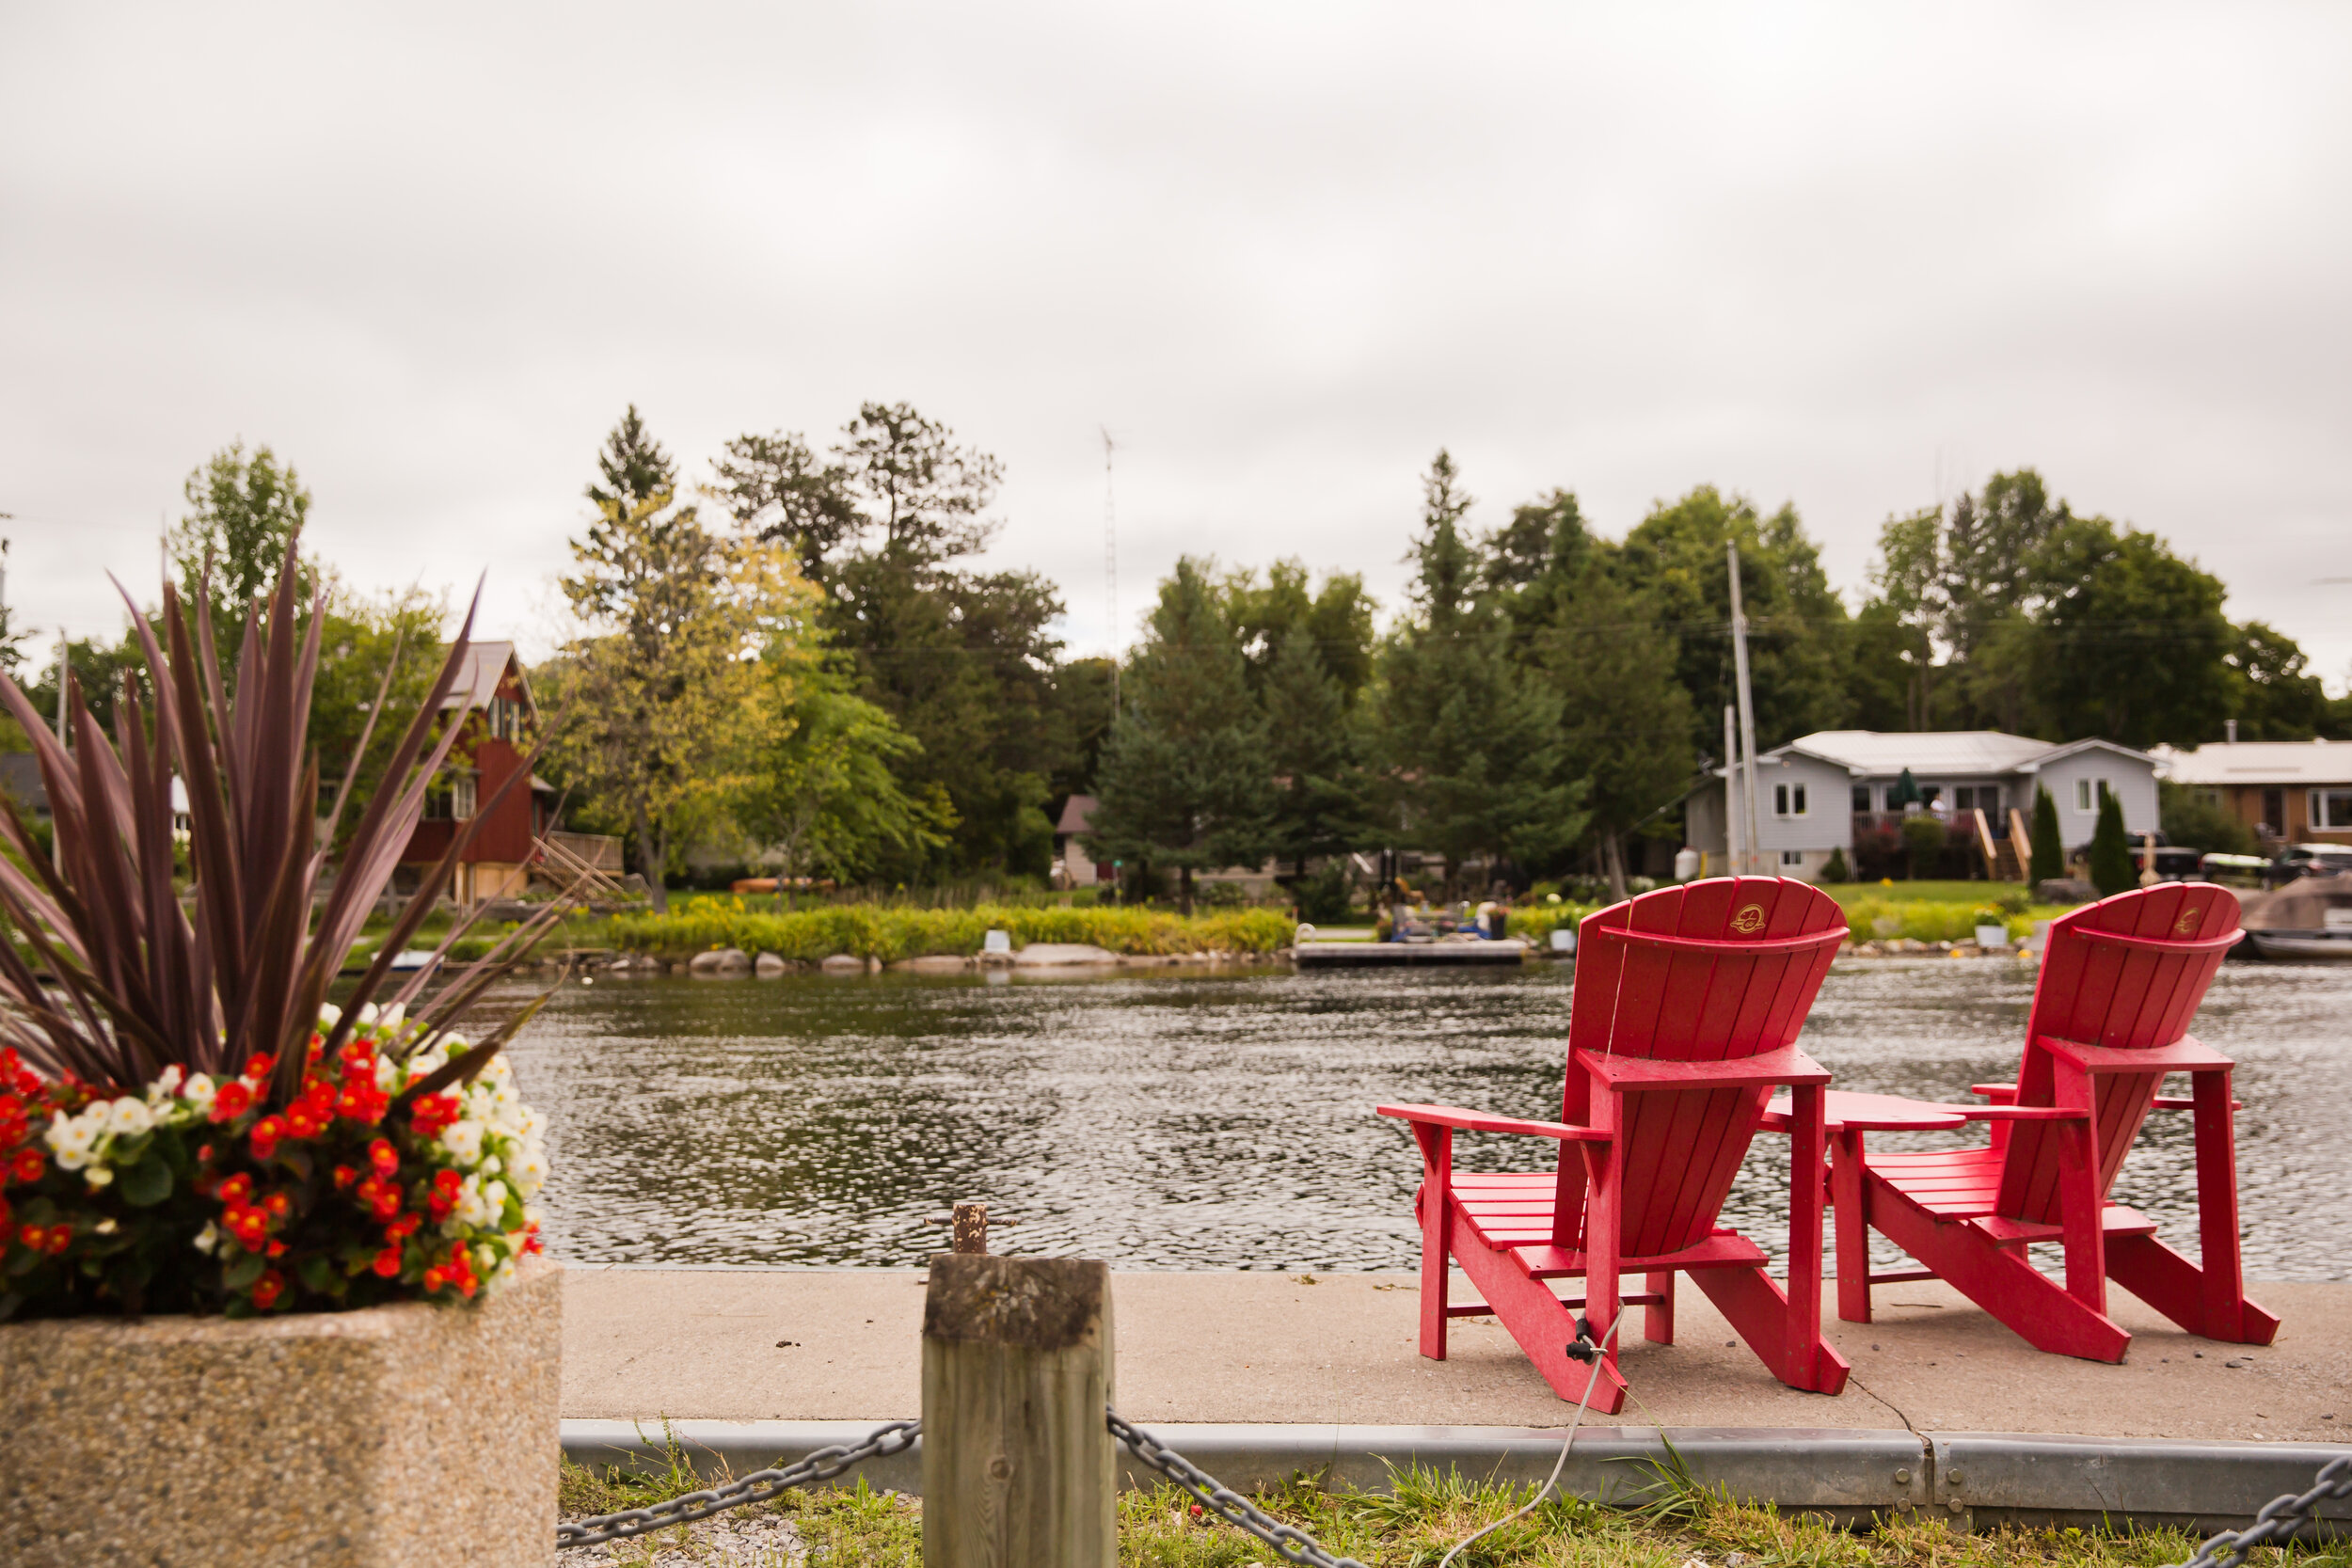 The Red Chairs Experience Program - Parks Canada